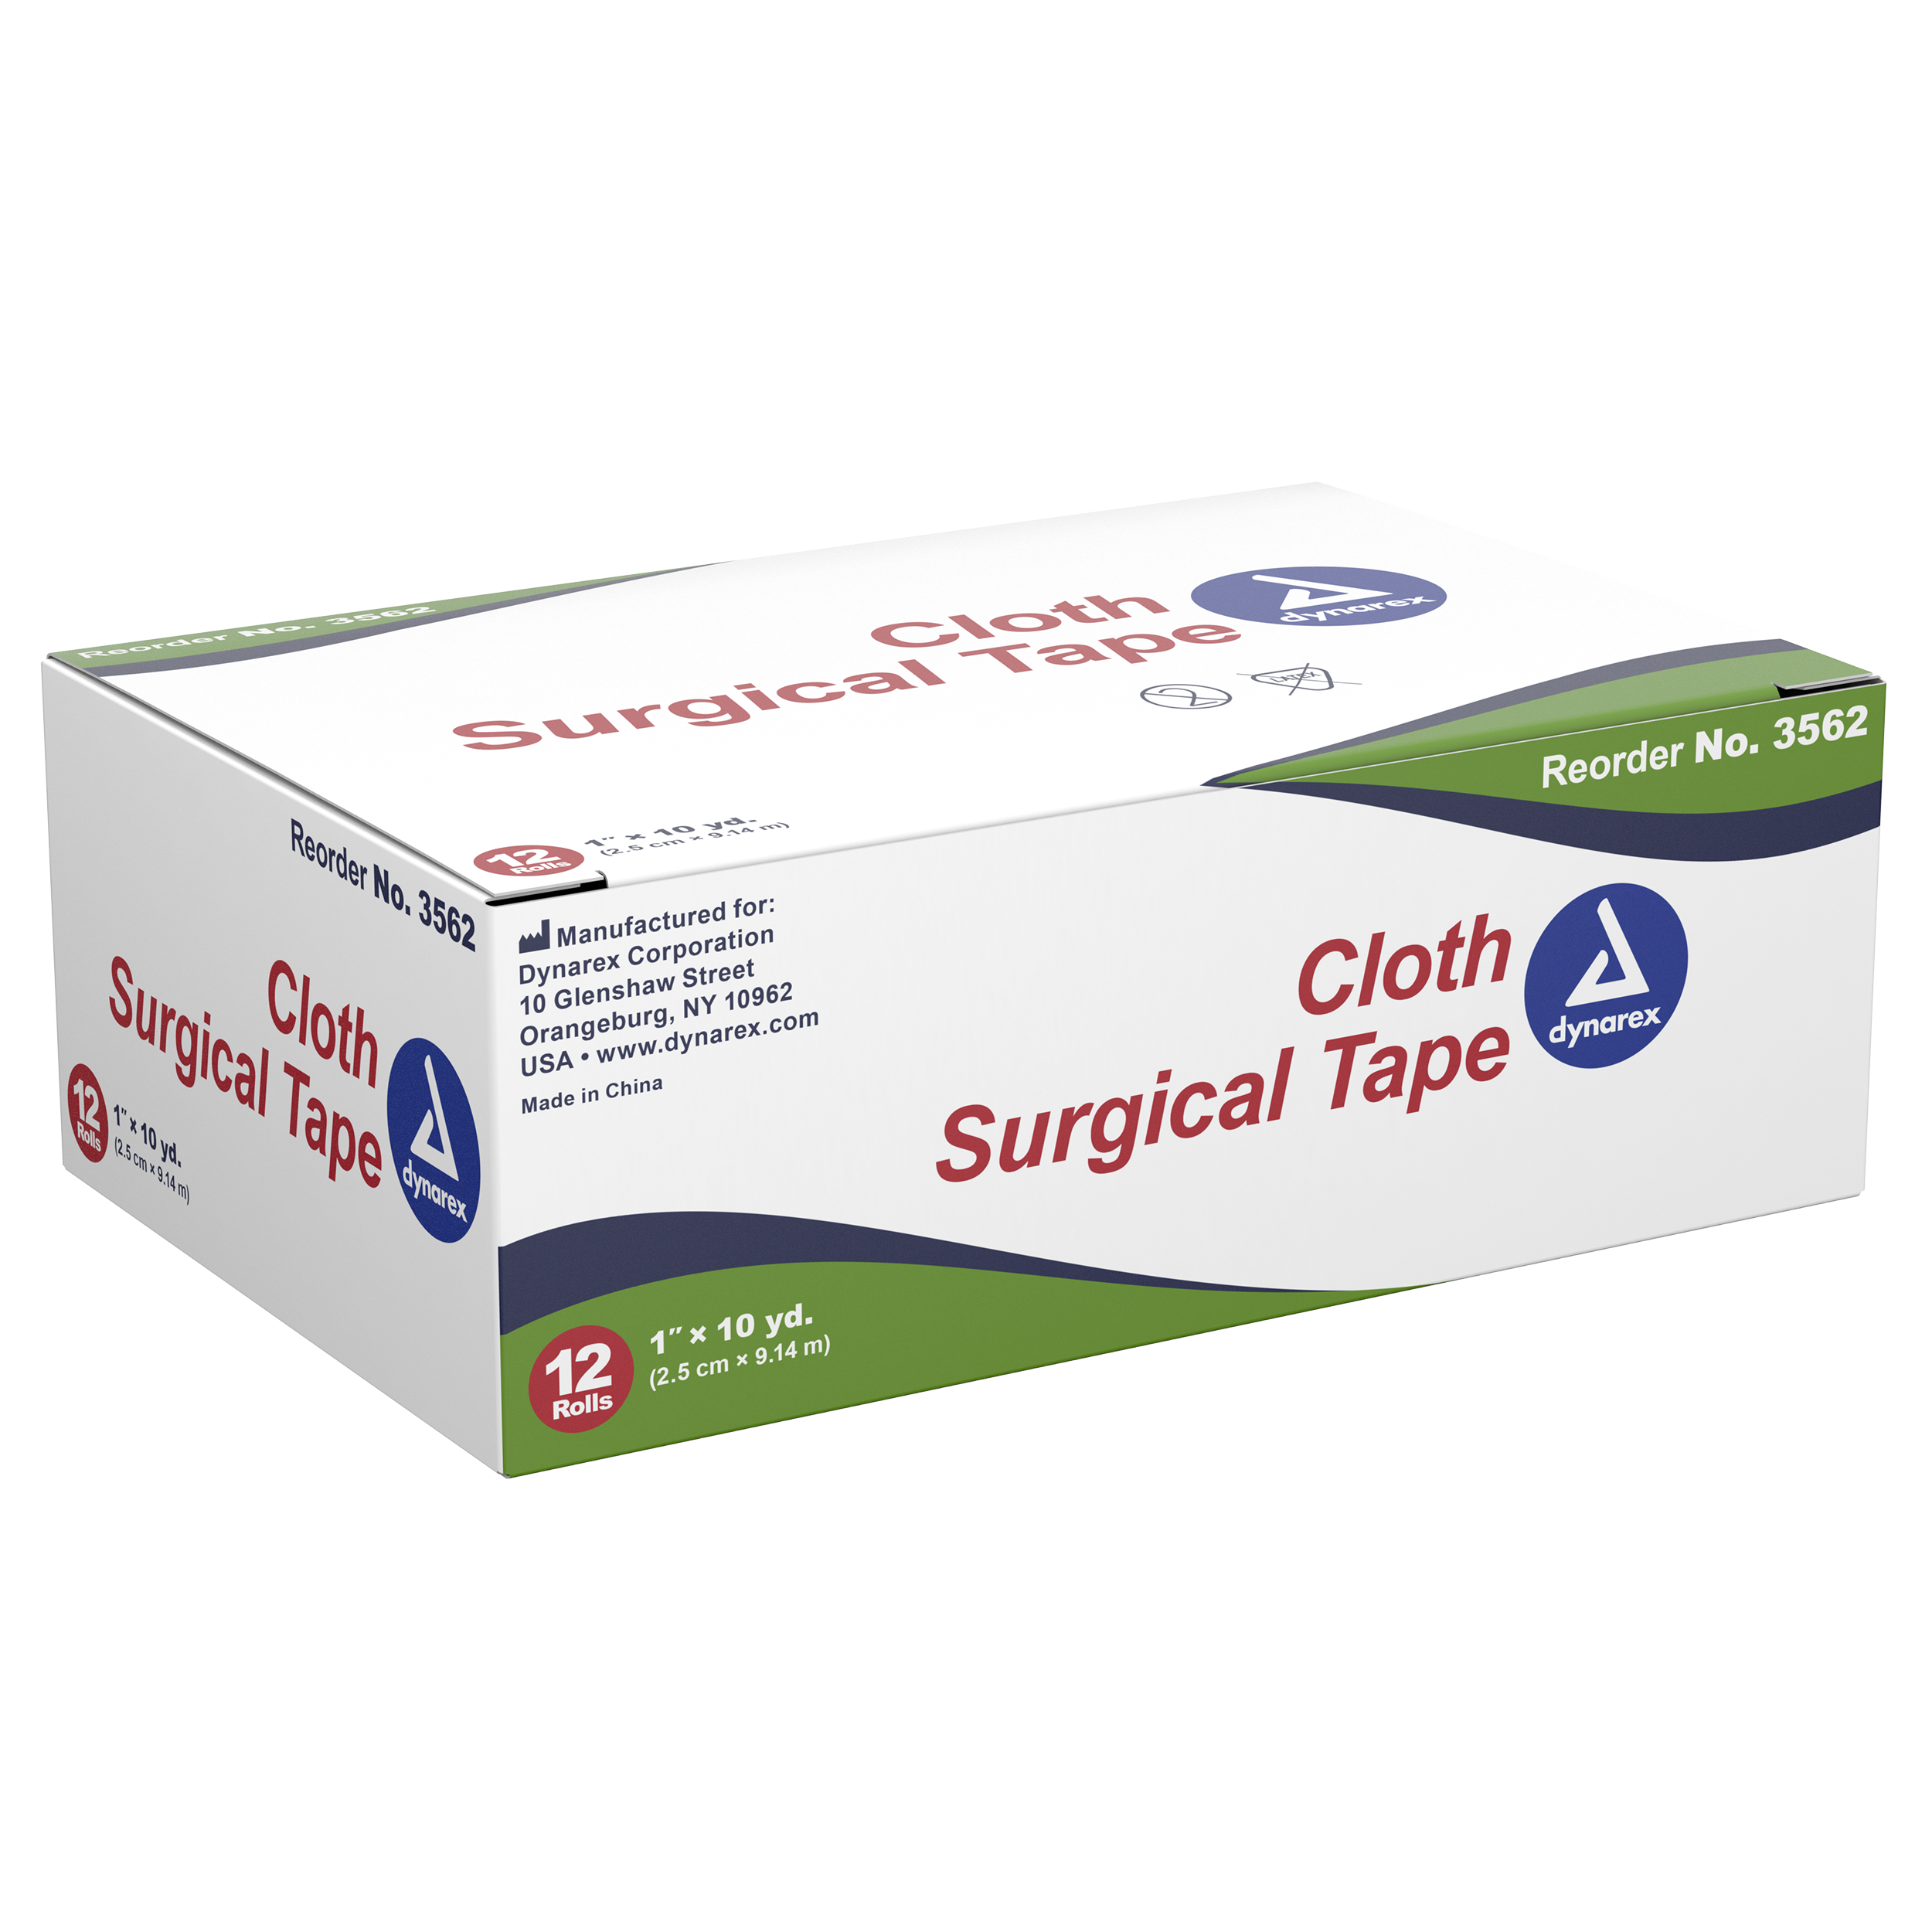 Cloth Surgical Tape - 1